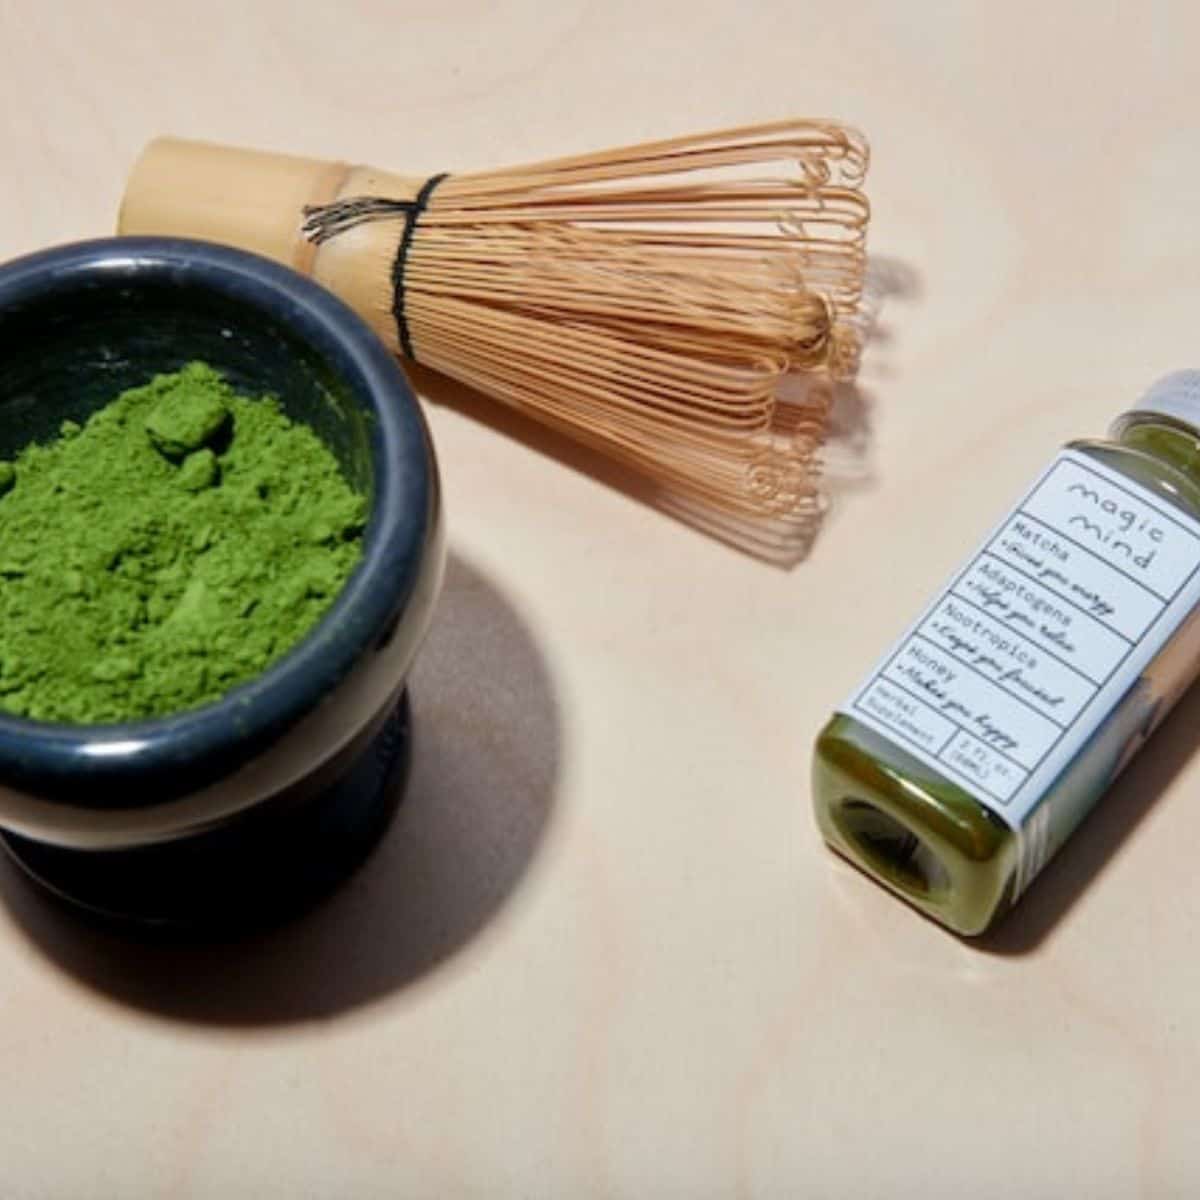 Green tea powder in a small black bowl with a mini matcha bottle on the side and a brown manual food mixer